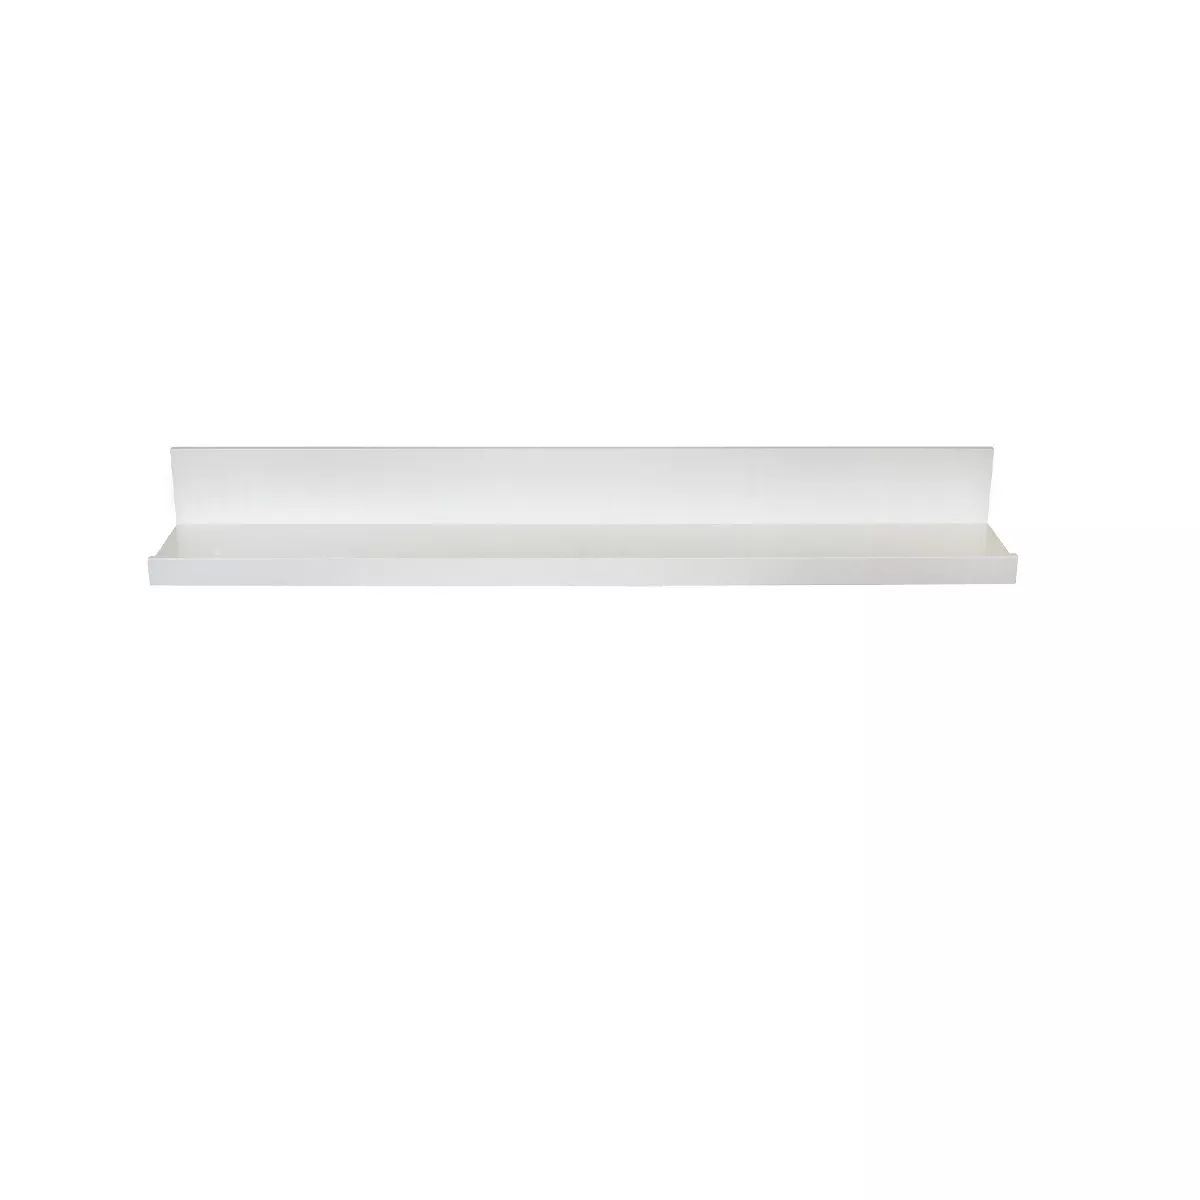 35.4" x 4.5" Picture Ledge Wall Shelf White - InPlace | Target